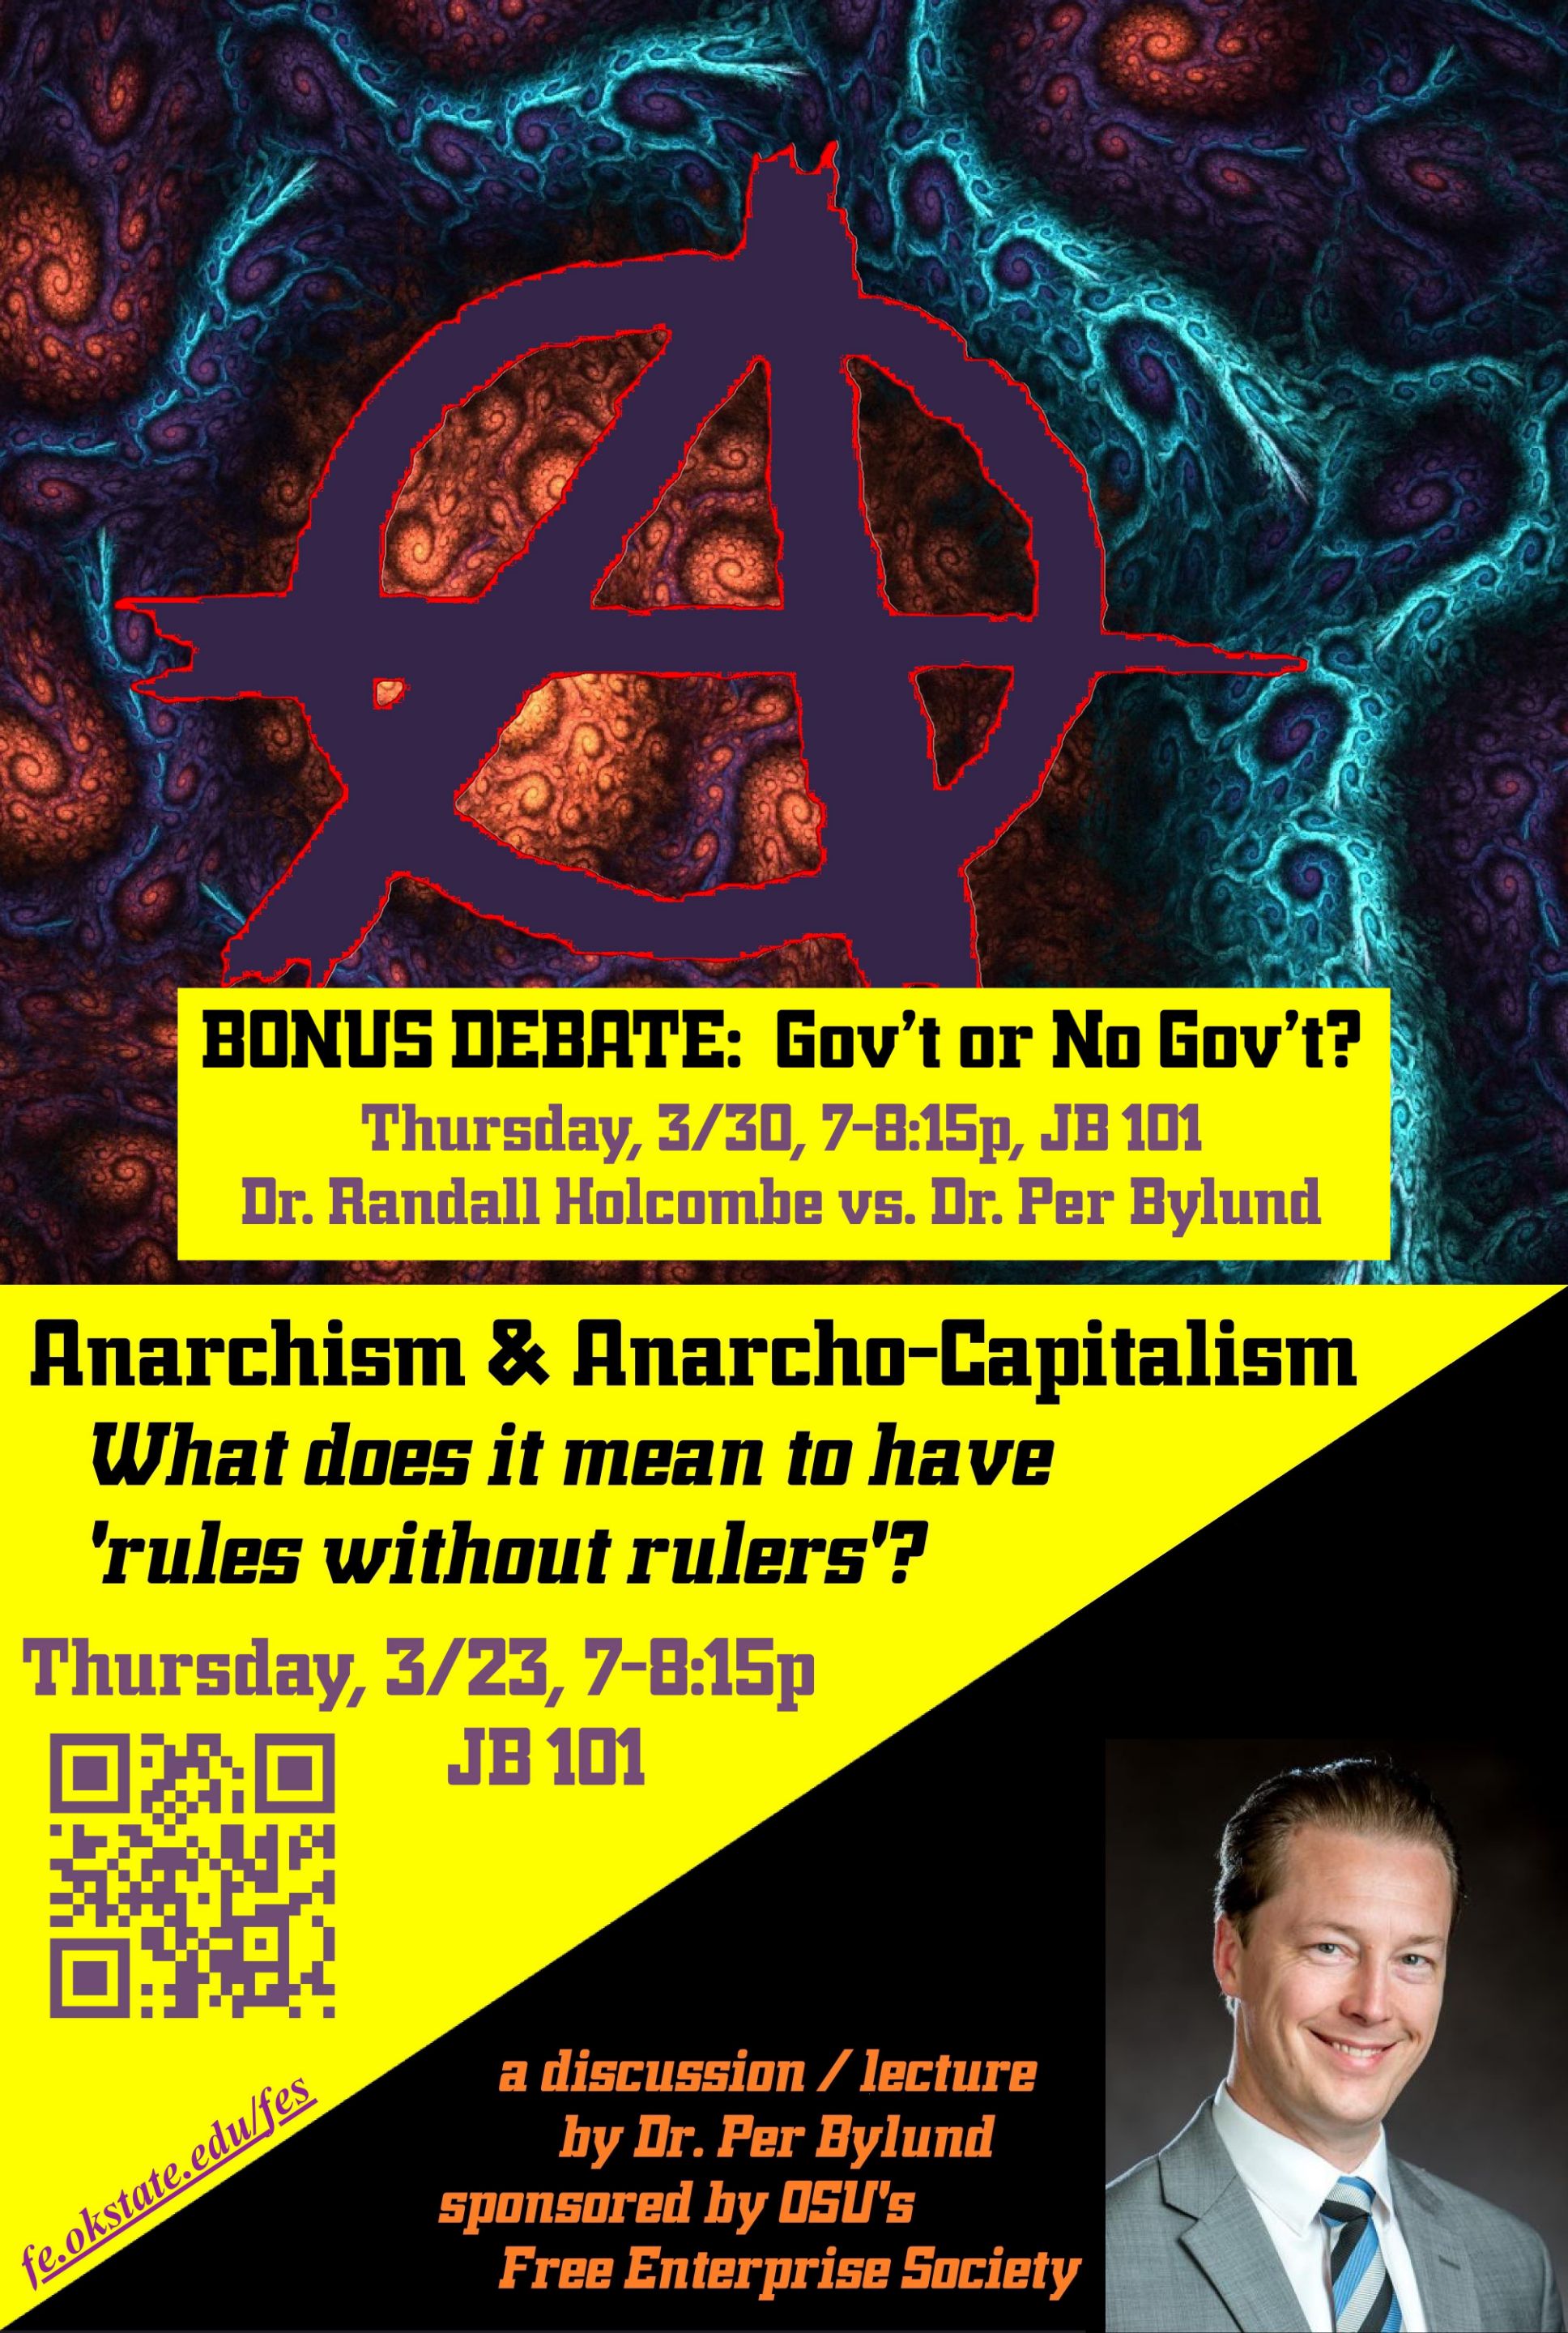 @trostparadox/anarchism-and-anarcho-capitalism-lecture-by-dr-per-bylund-3-23-23-7-00p-cdt-will-be-livestreamed